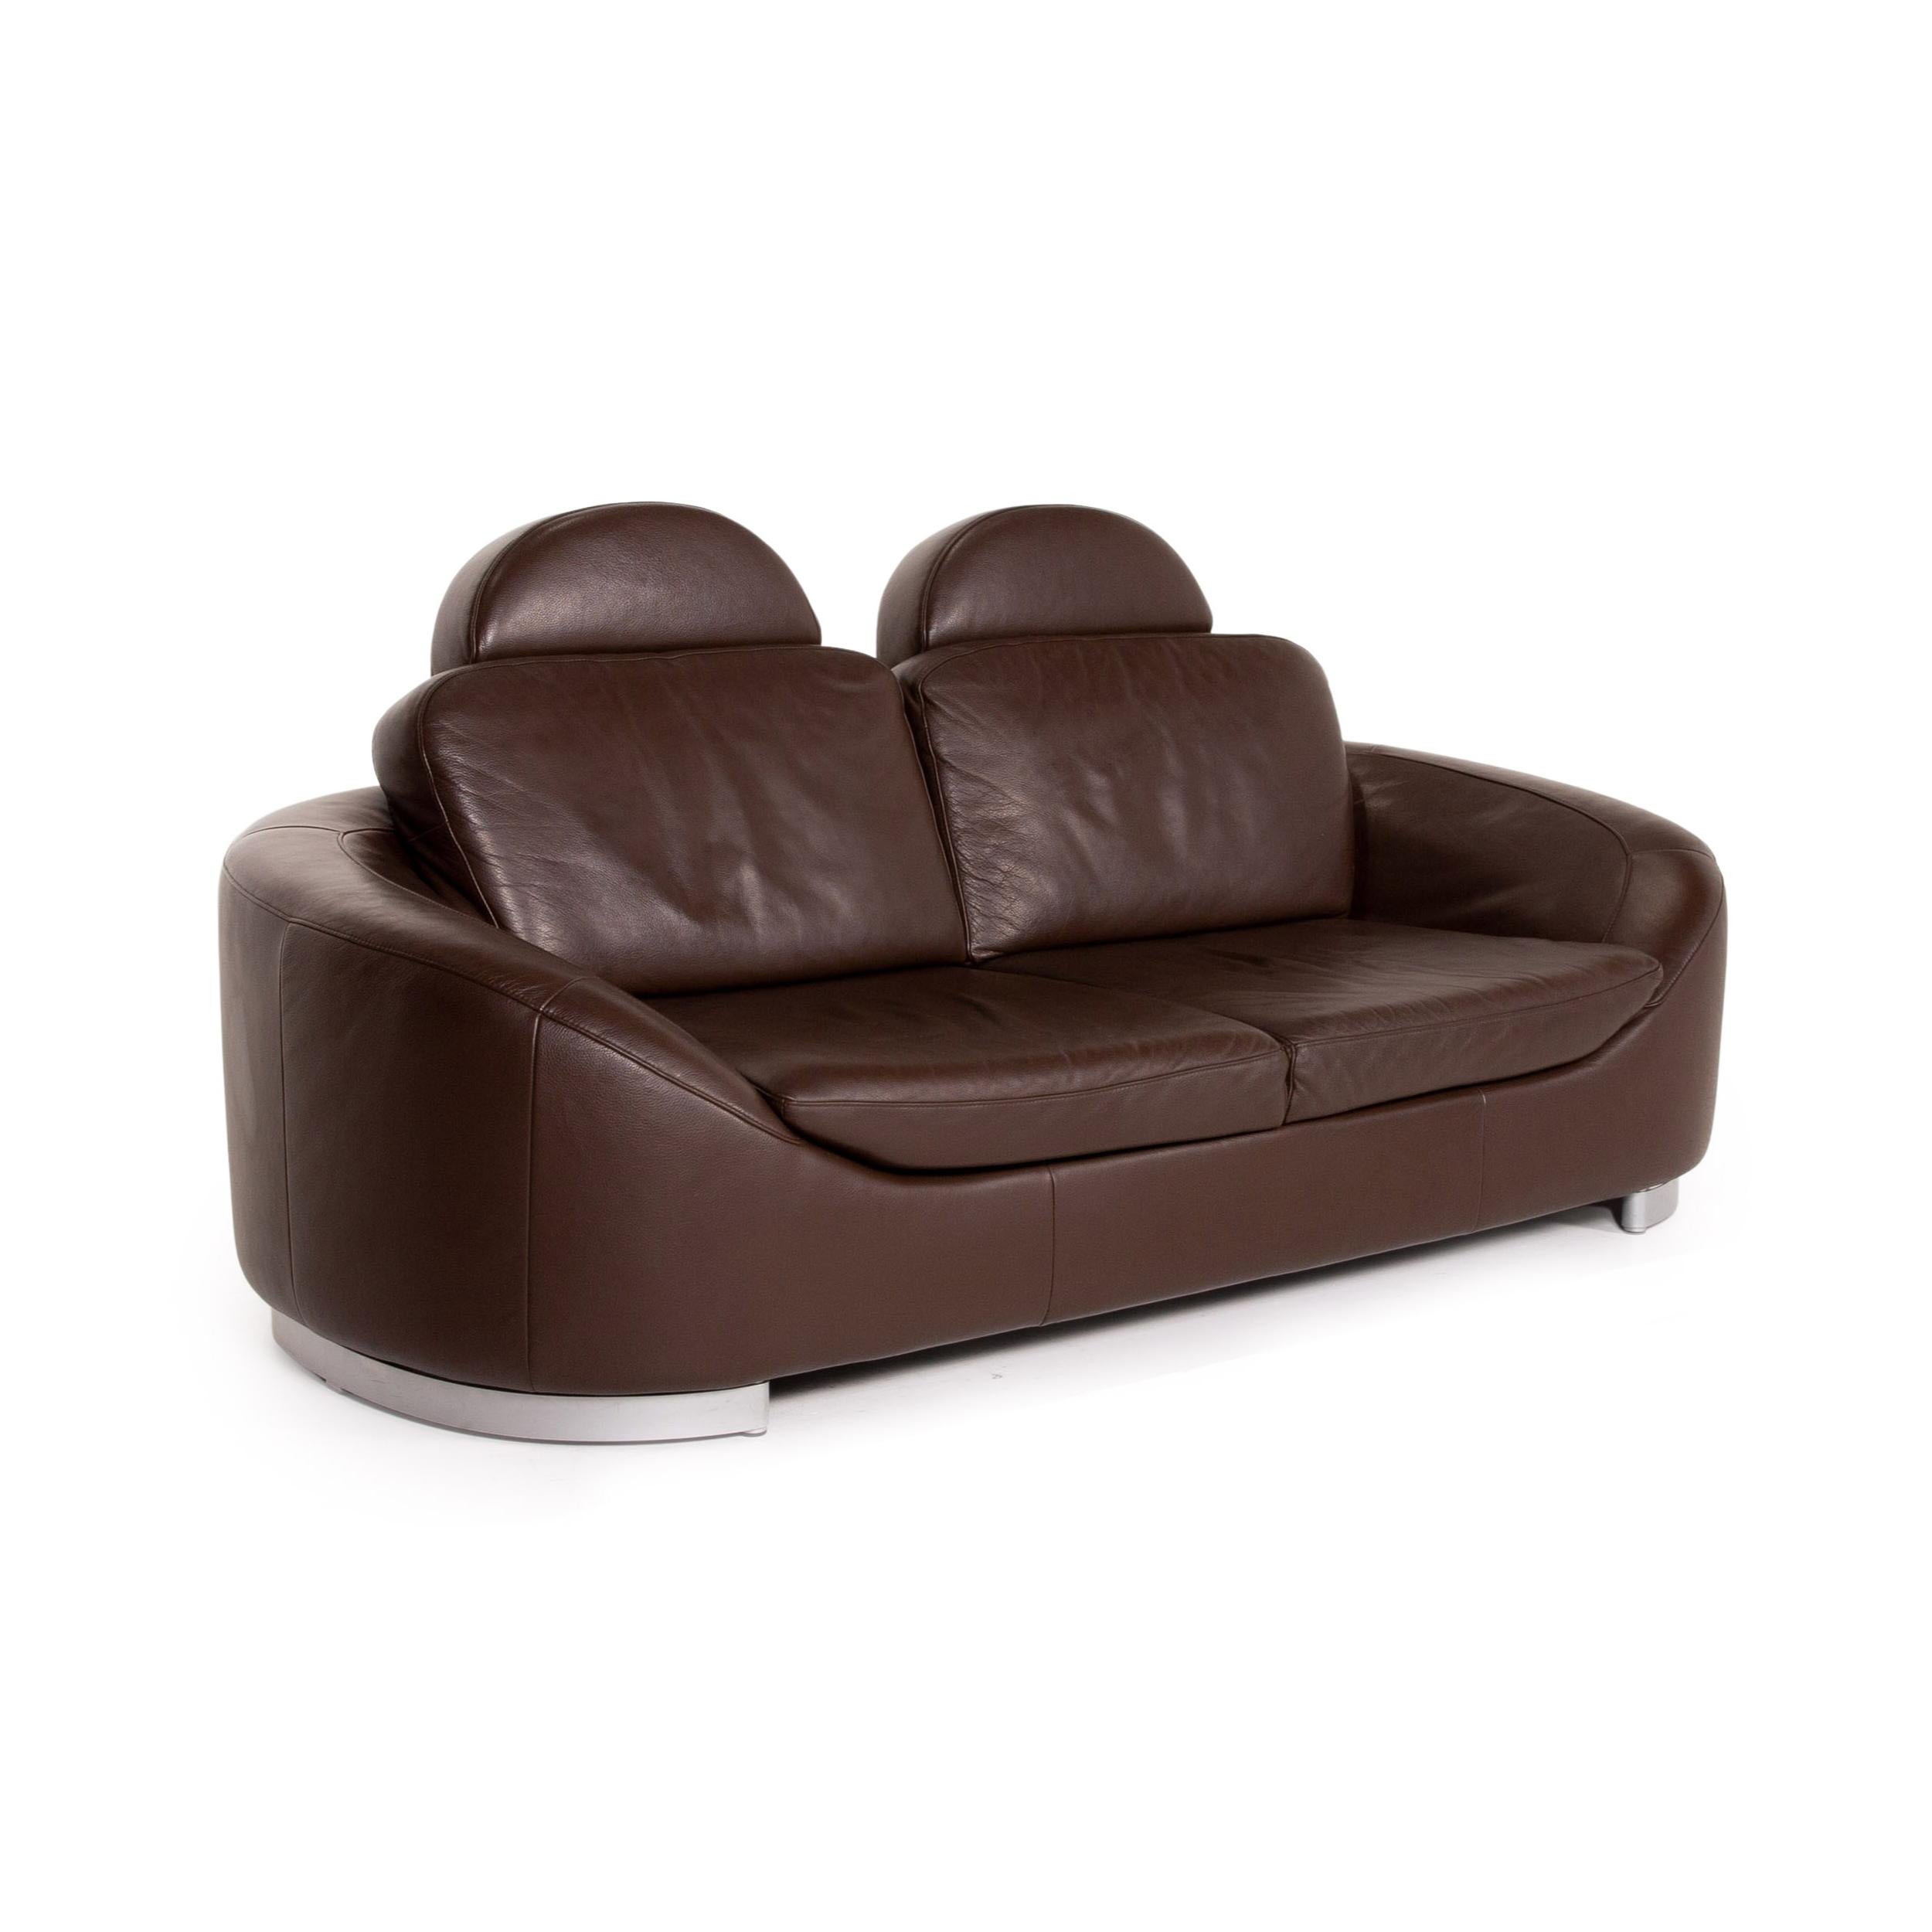 Ewald Schillig Leather Sofa Set Brown Dark Brown 2x Two-Seater For Sale 7